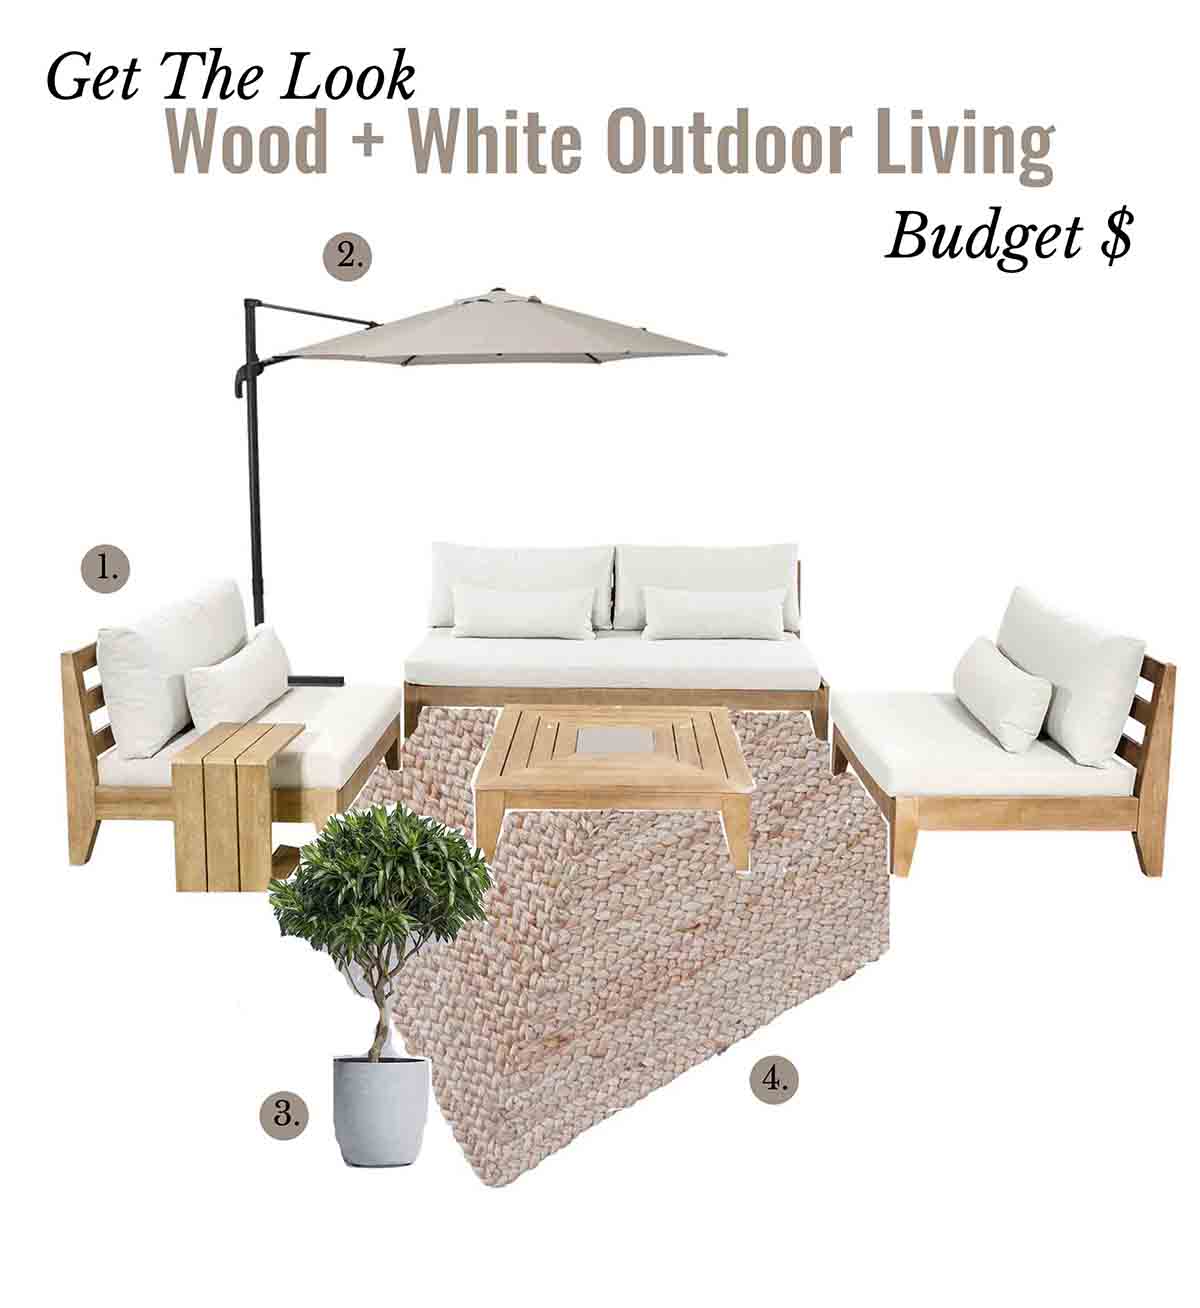 Wood and White Outdoor Living Budget